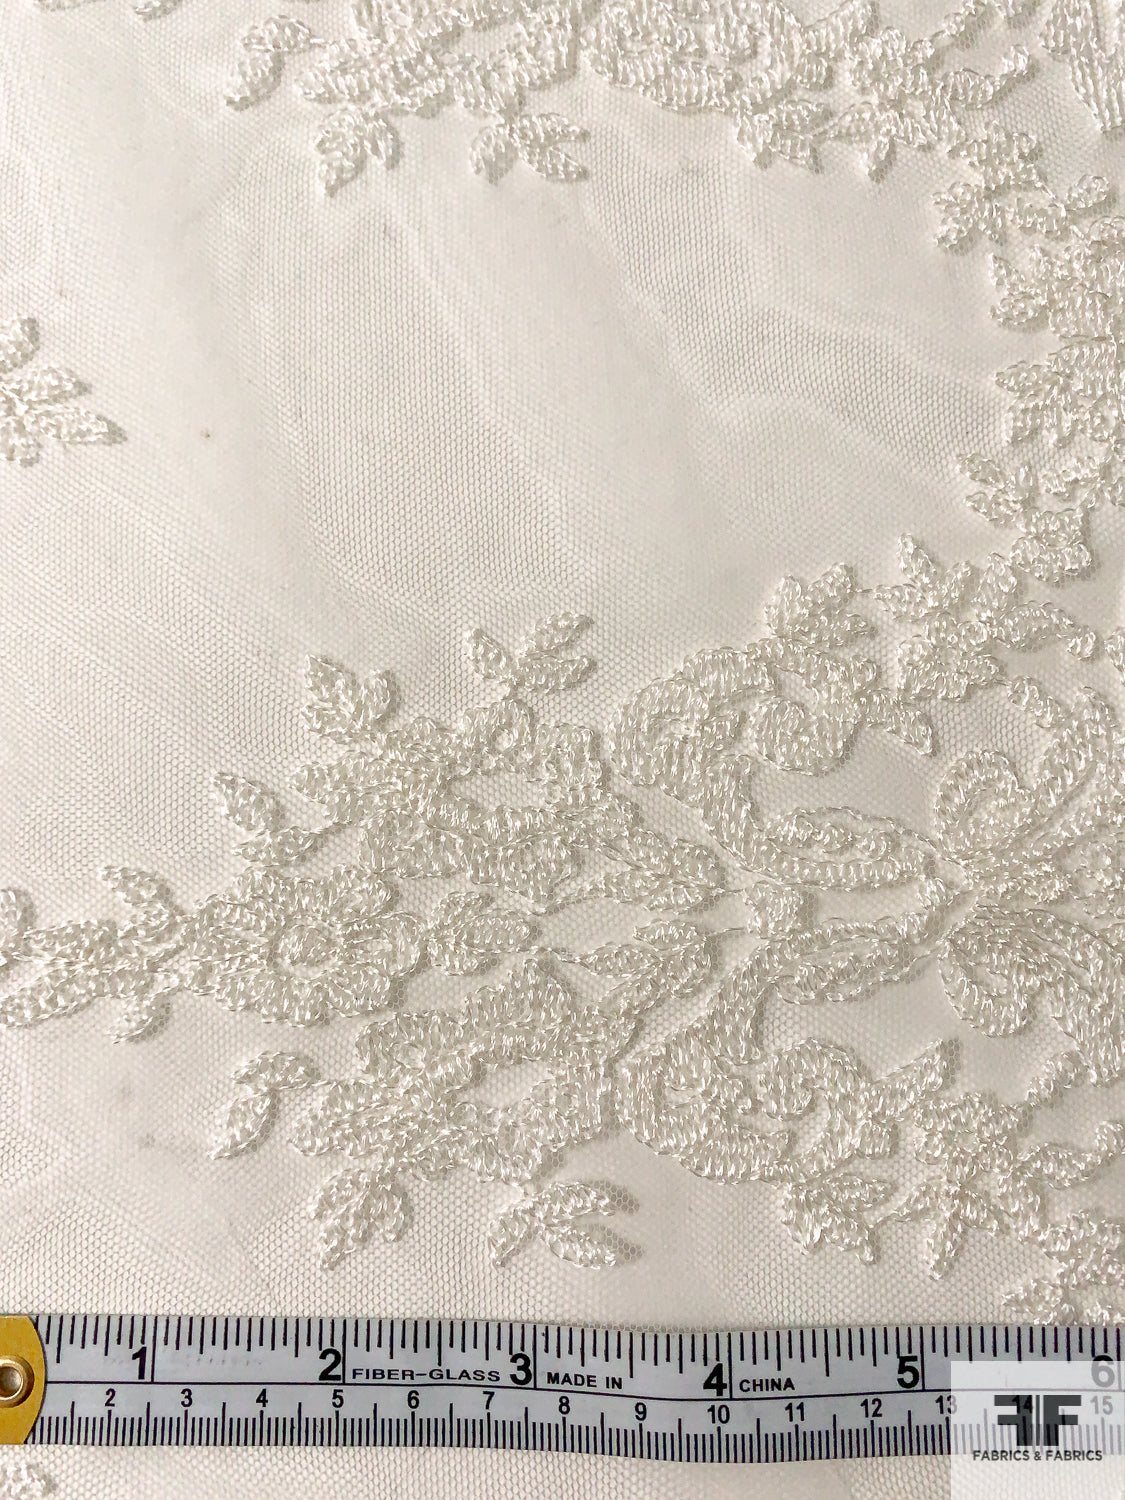 White Floral Corded Lace - 3 Yard Panel